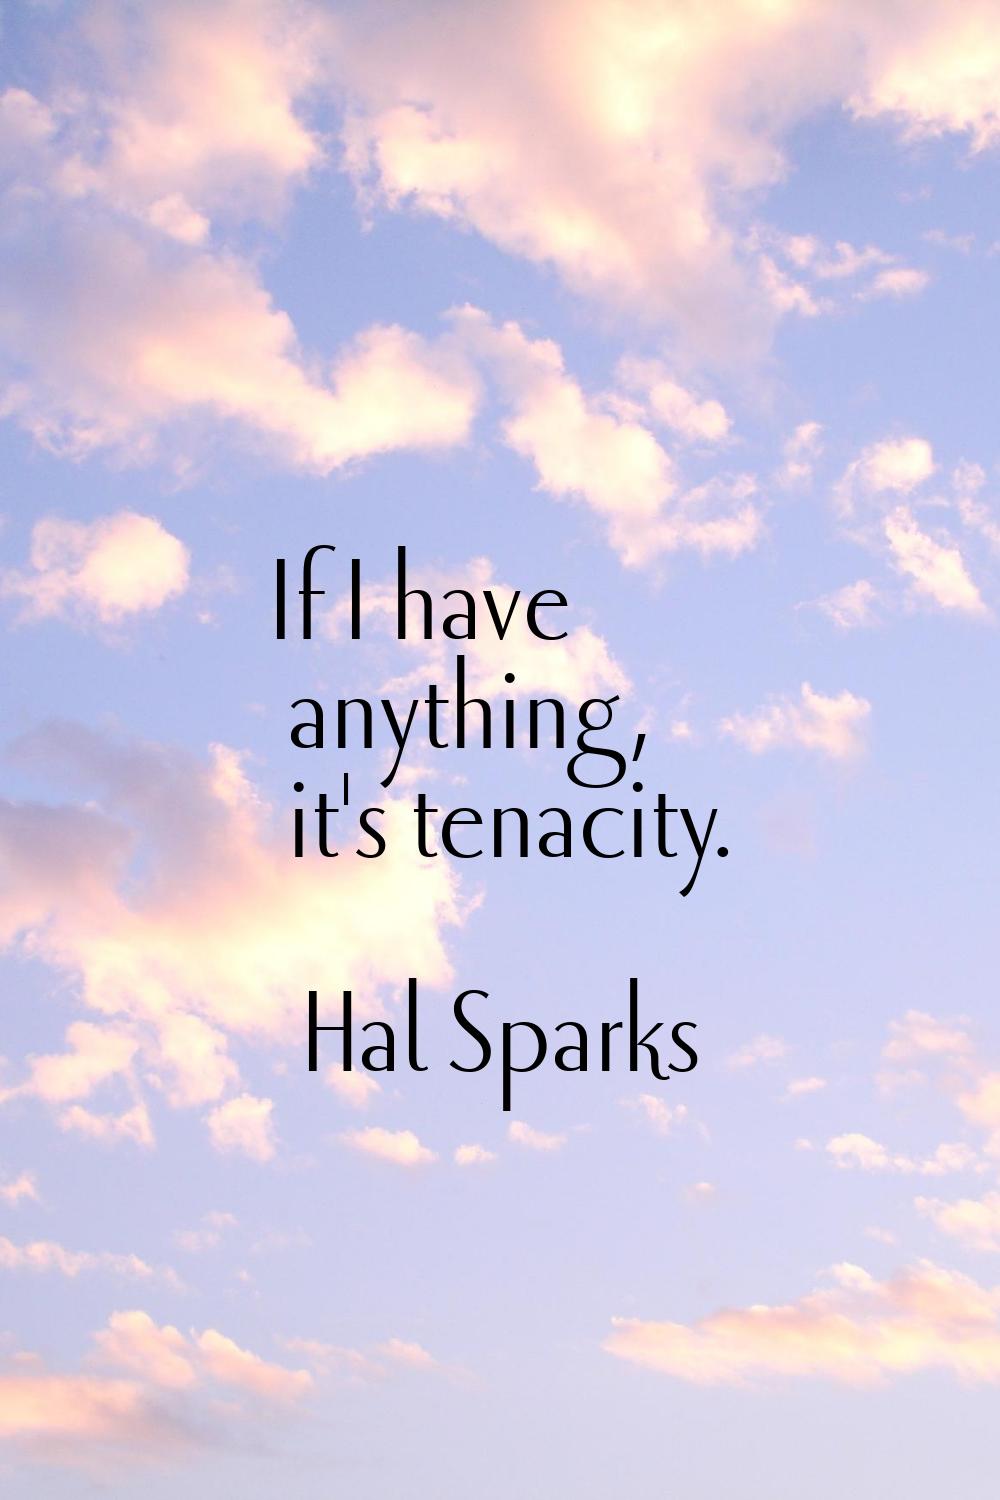 If I have anything, it's tenacity.